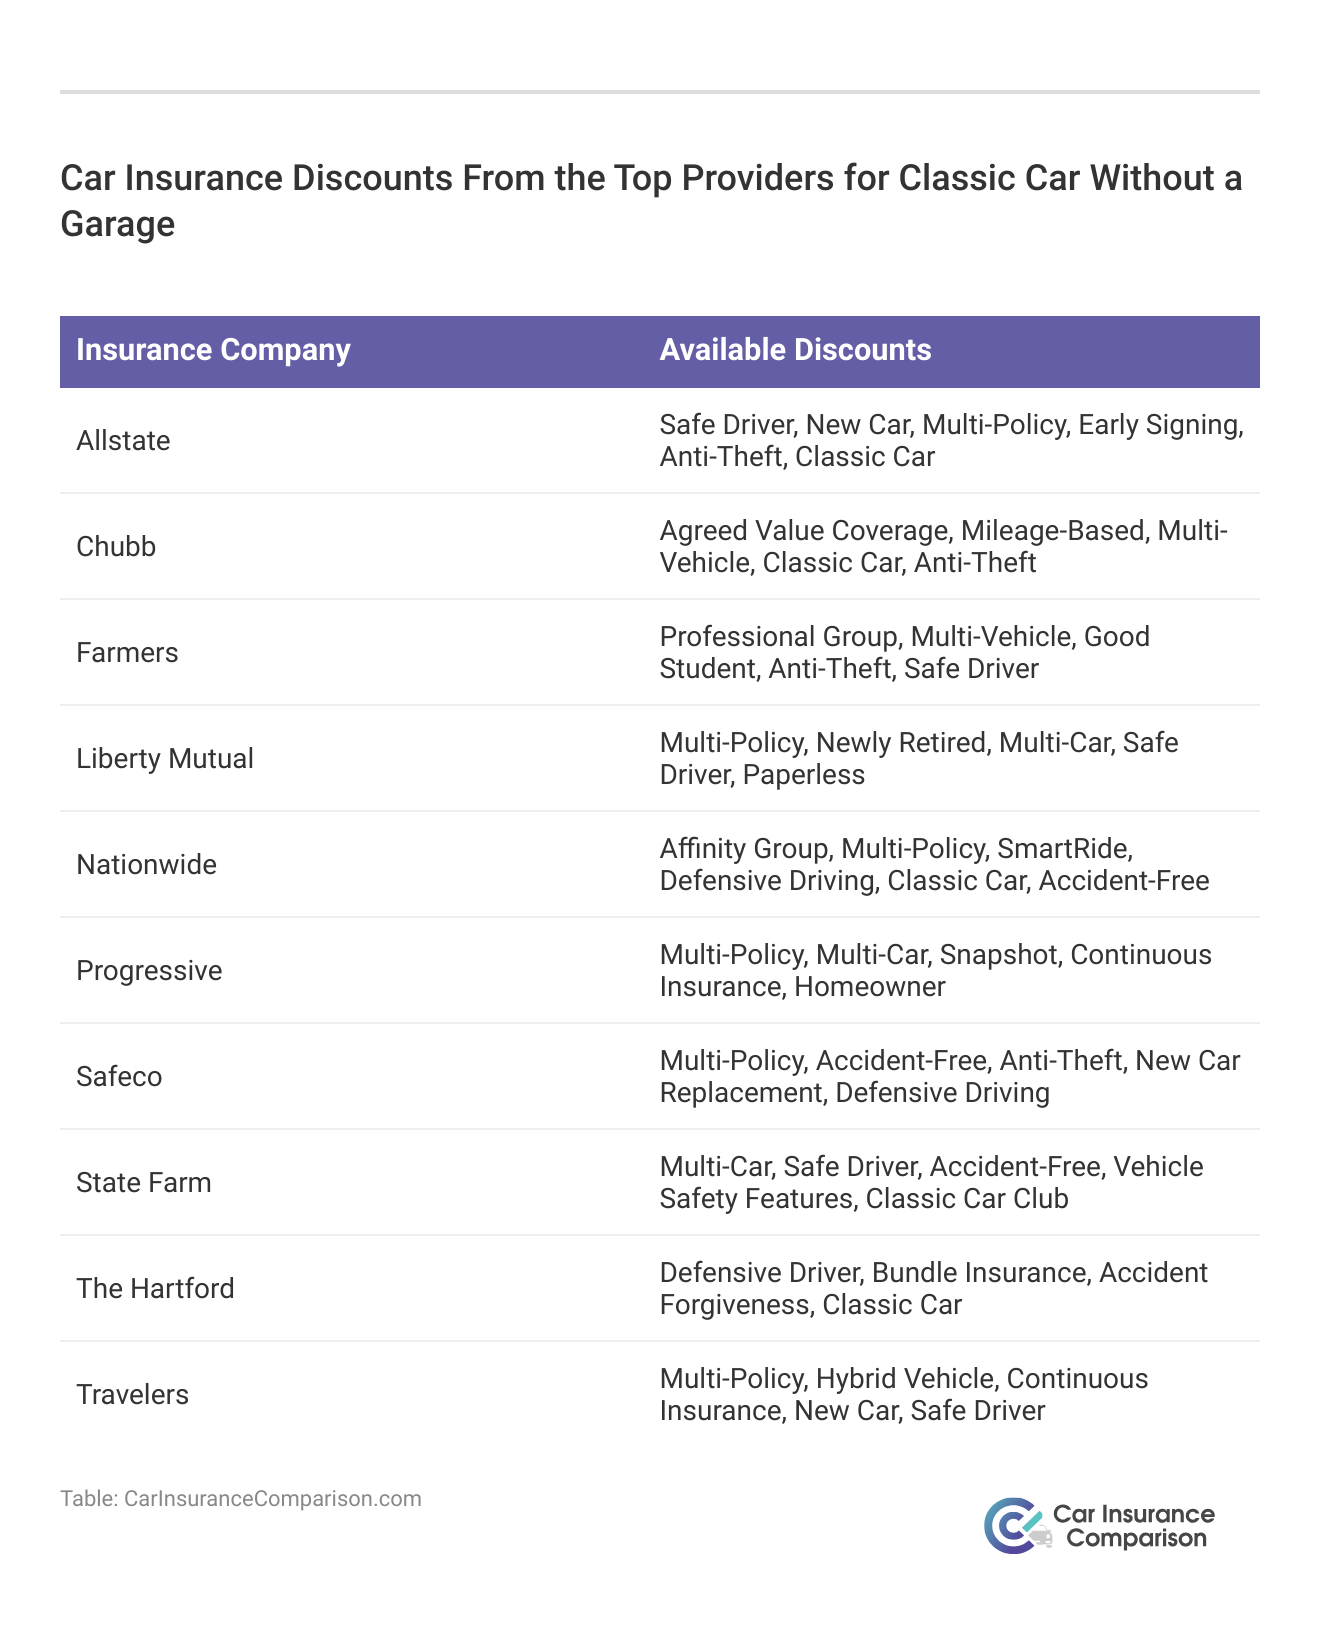 <h3>Car Insurance Discounts From the Top Providers for Classic Car Without a Garage</h3>